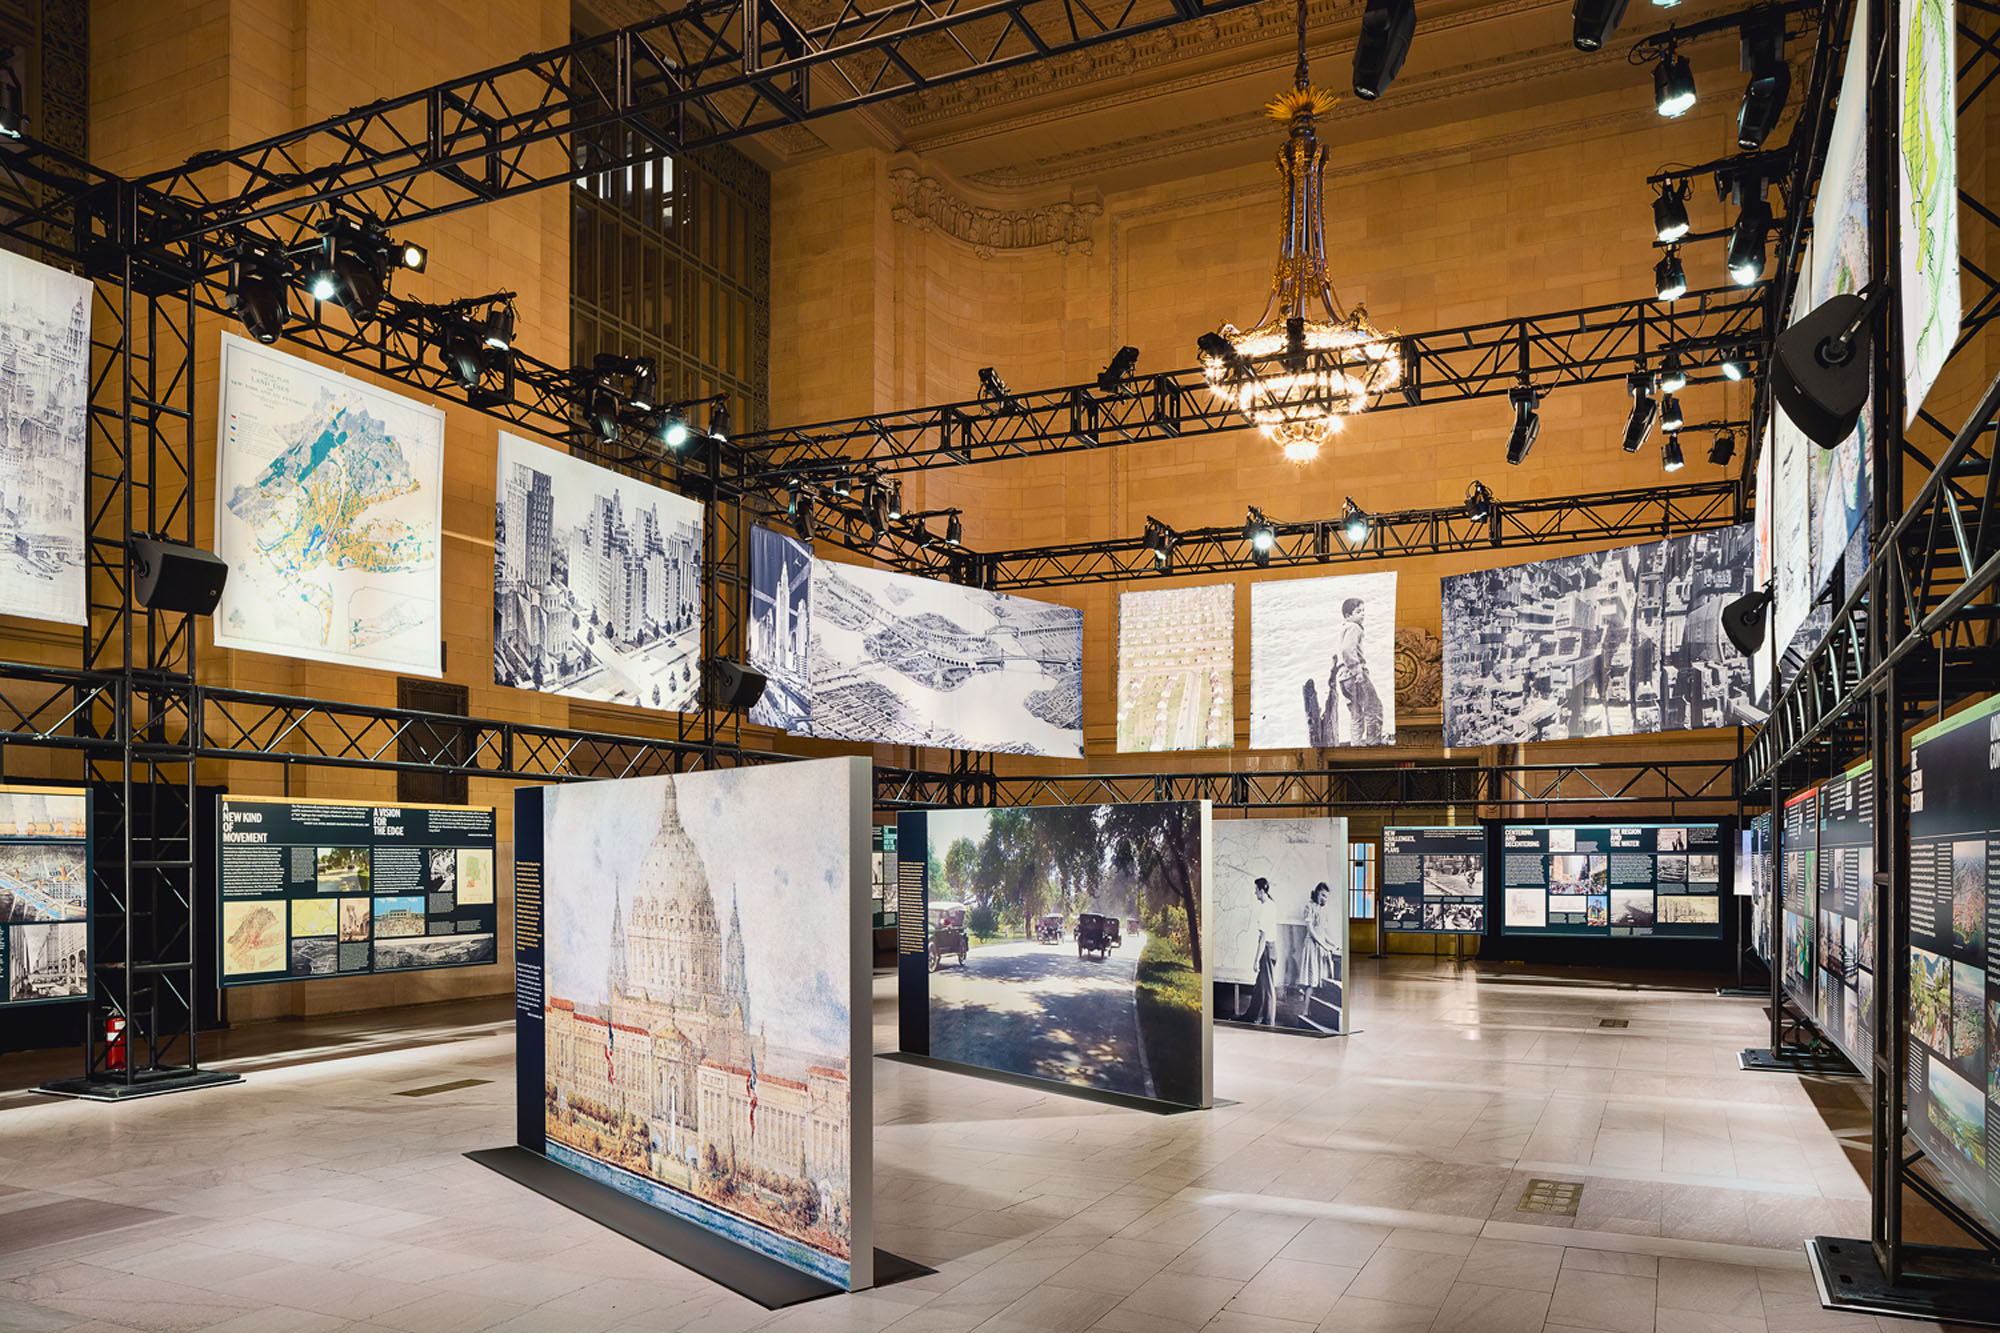 An exhibition of images from historic regional plans on view inside grand central terminal